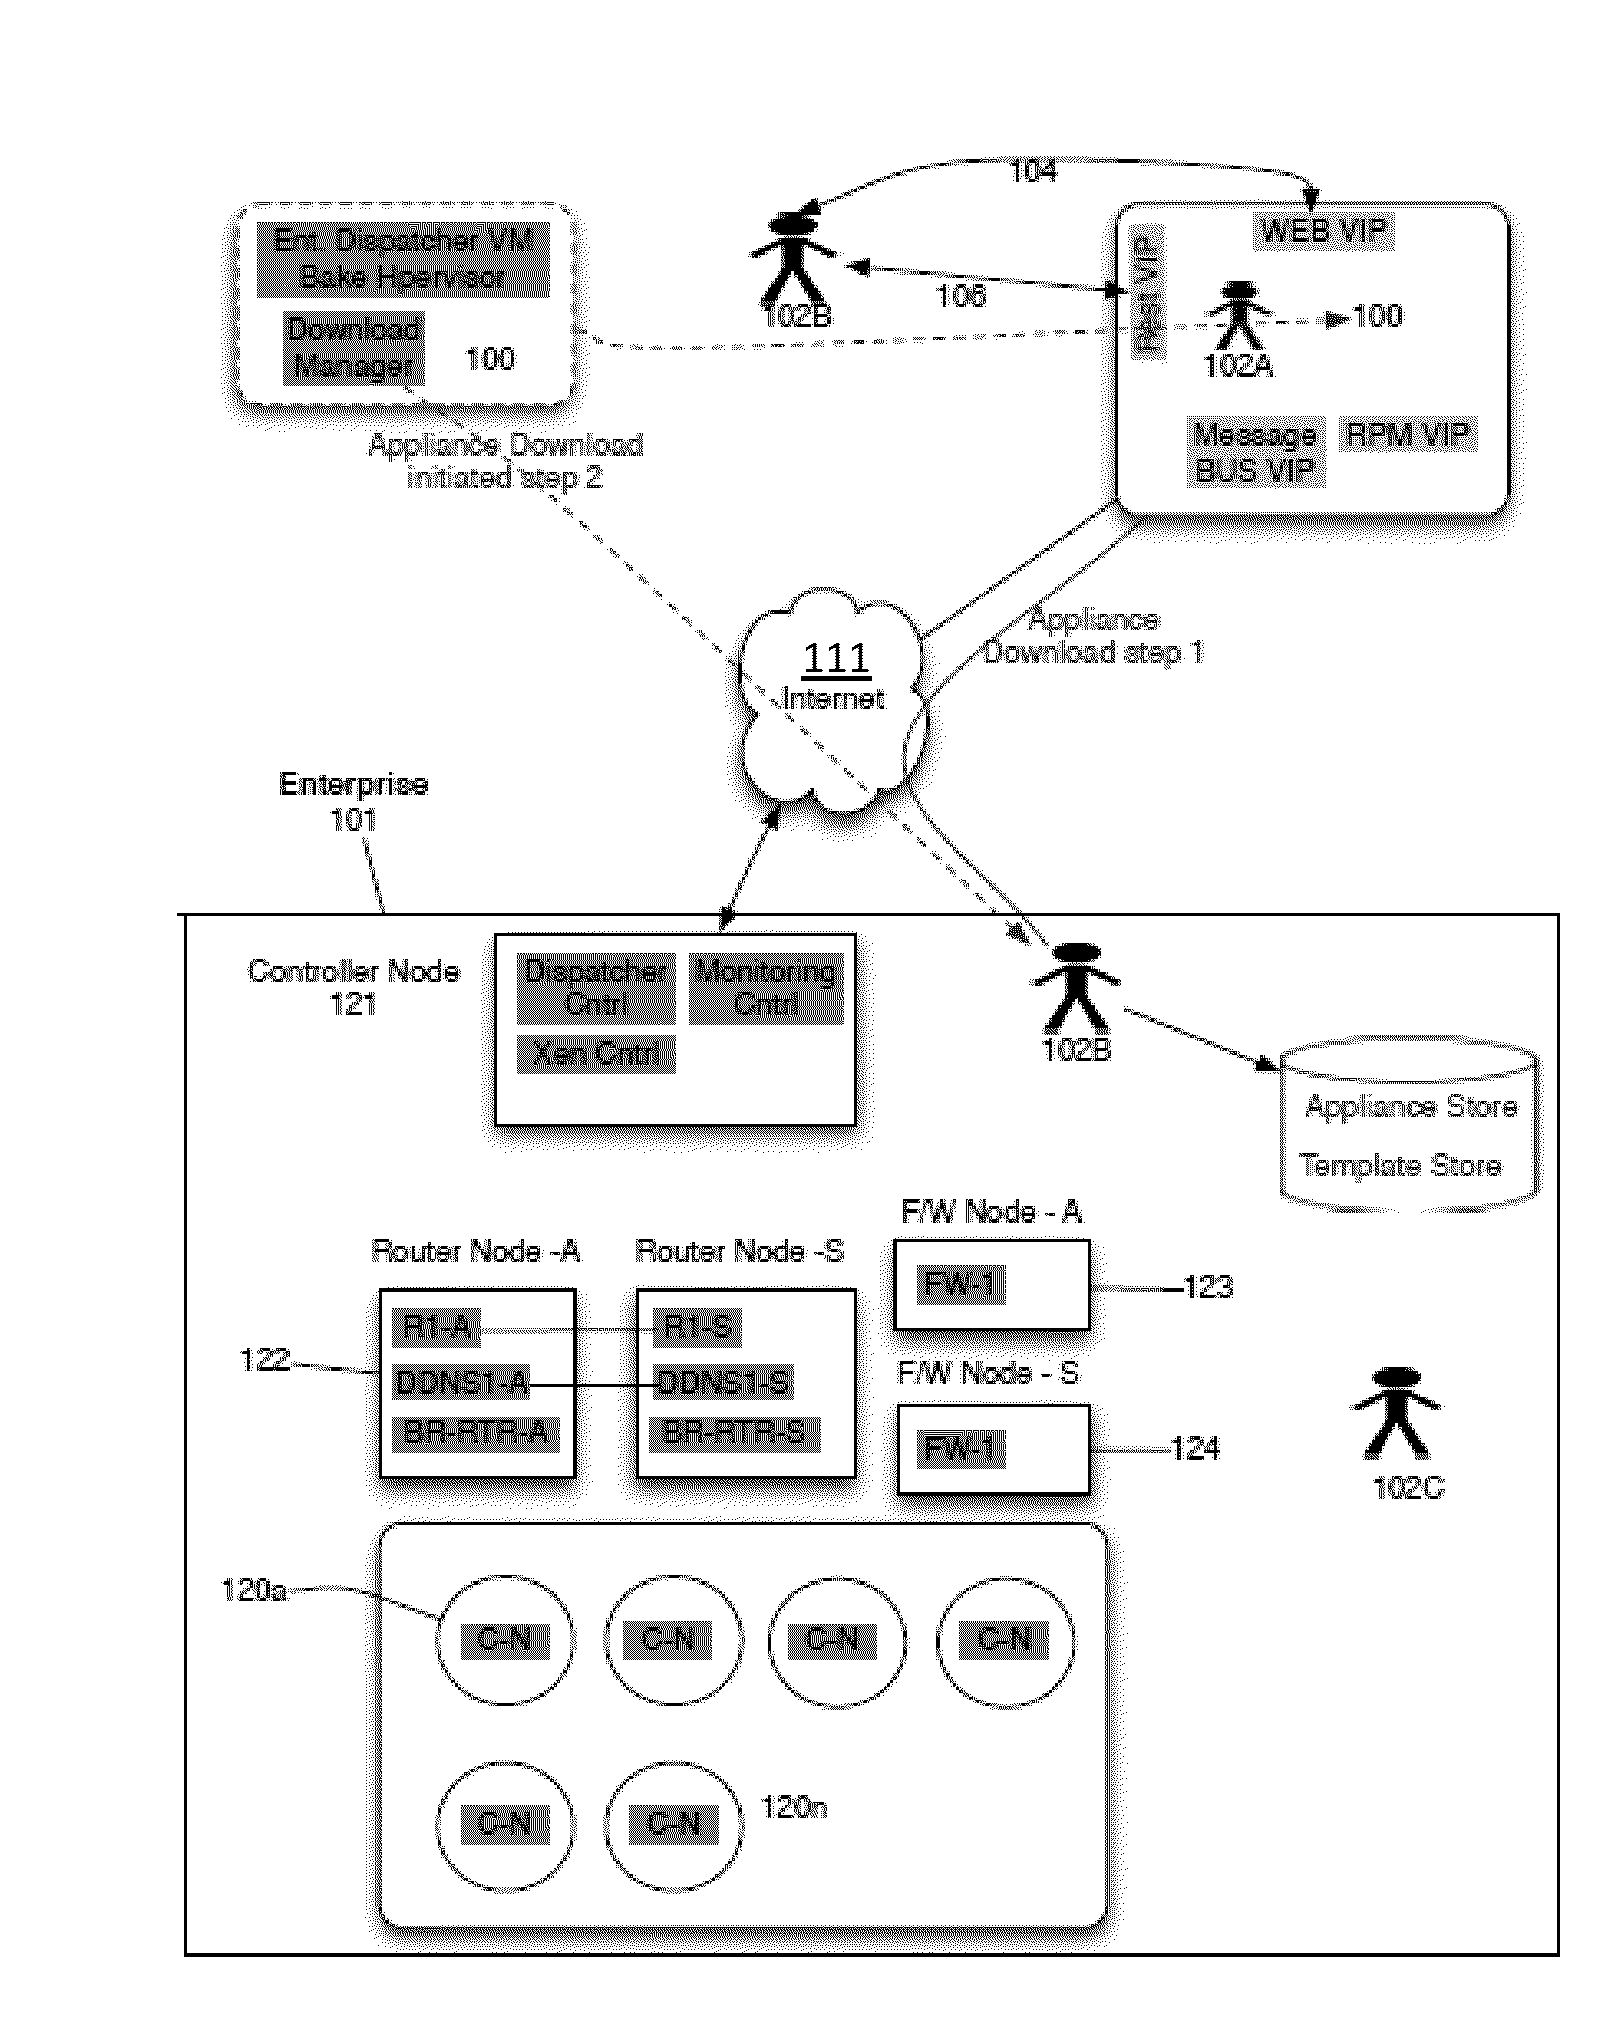 Method and apparatus for processing virtual machine instances in real time event stream for root cause analysis and dynamically suggesting instance remedy